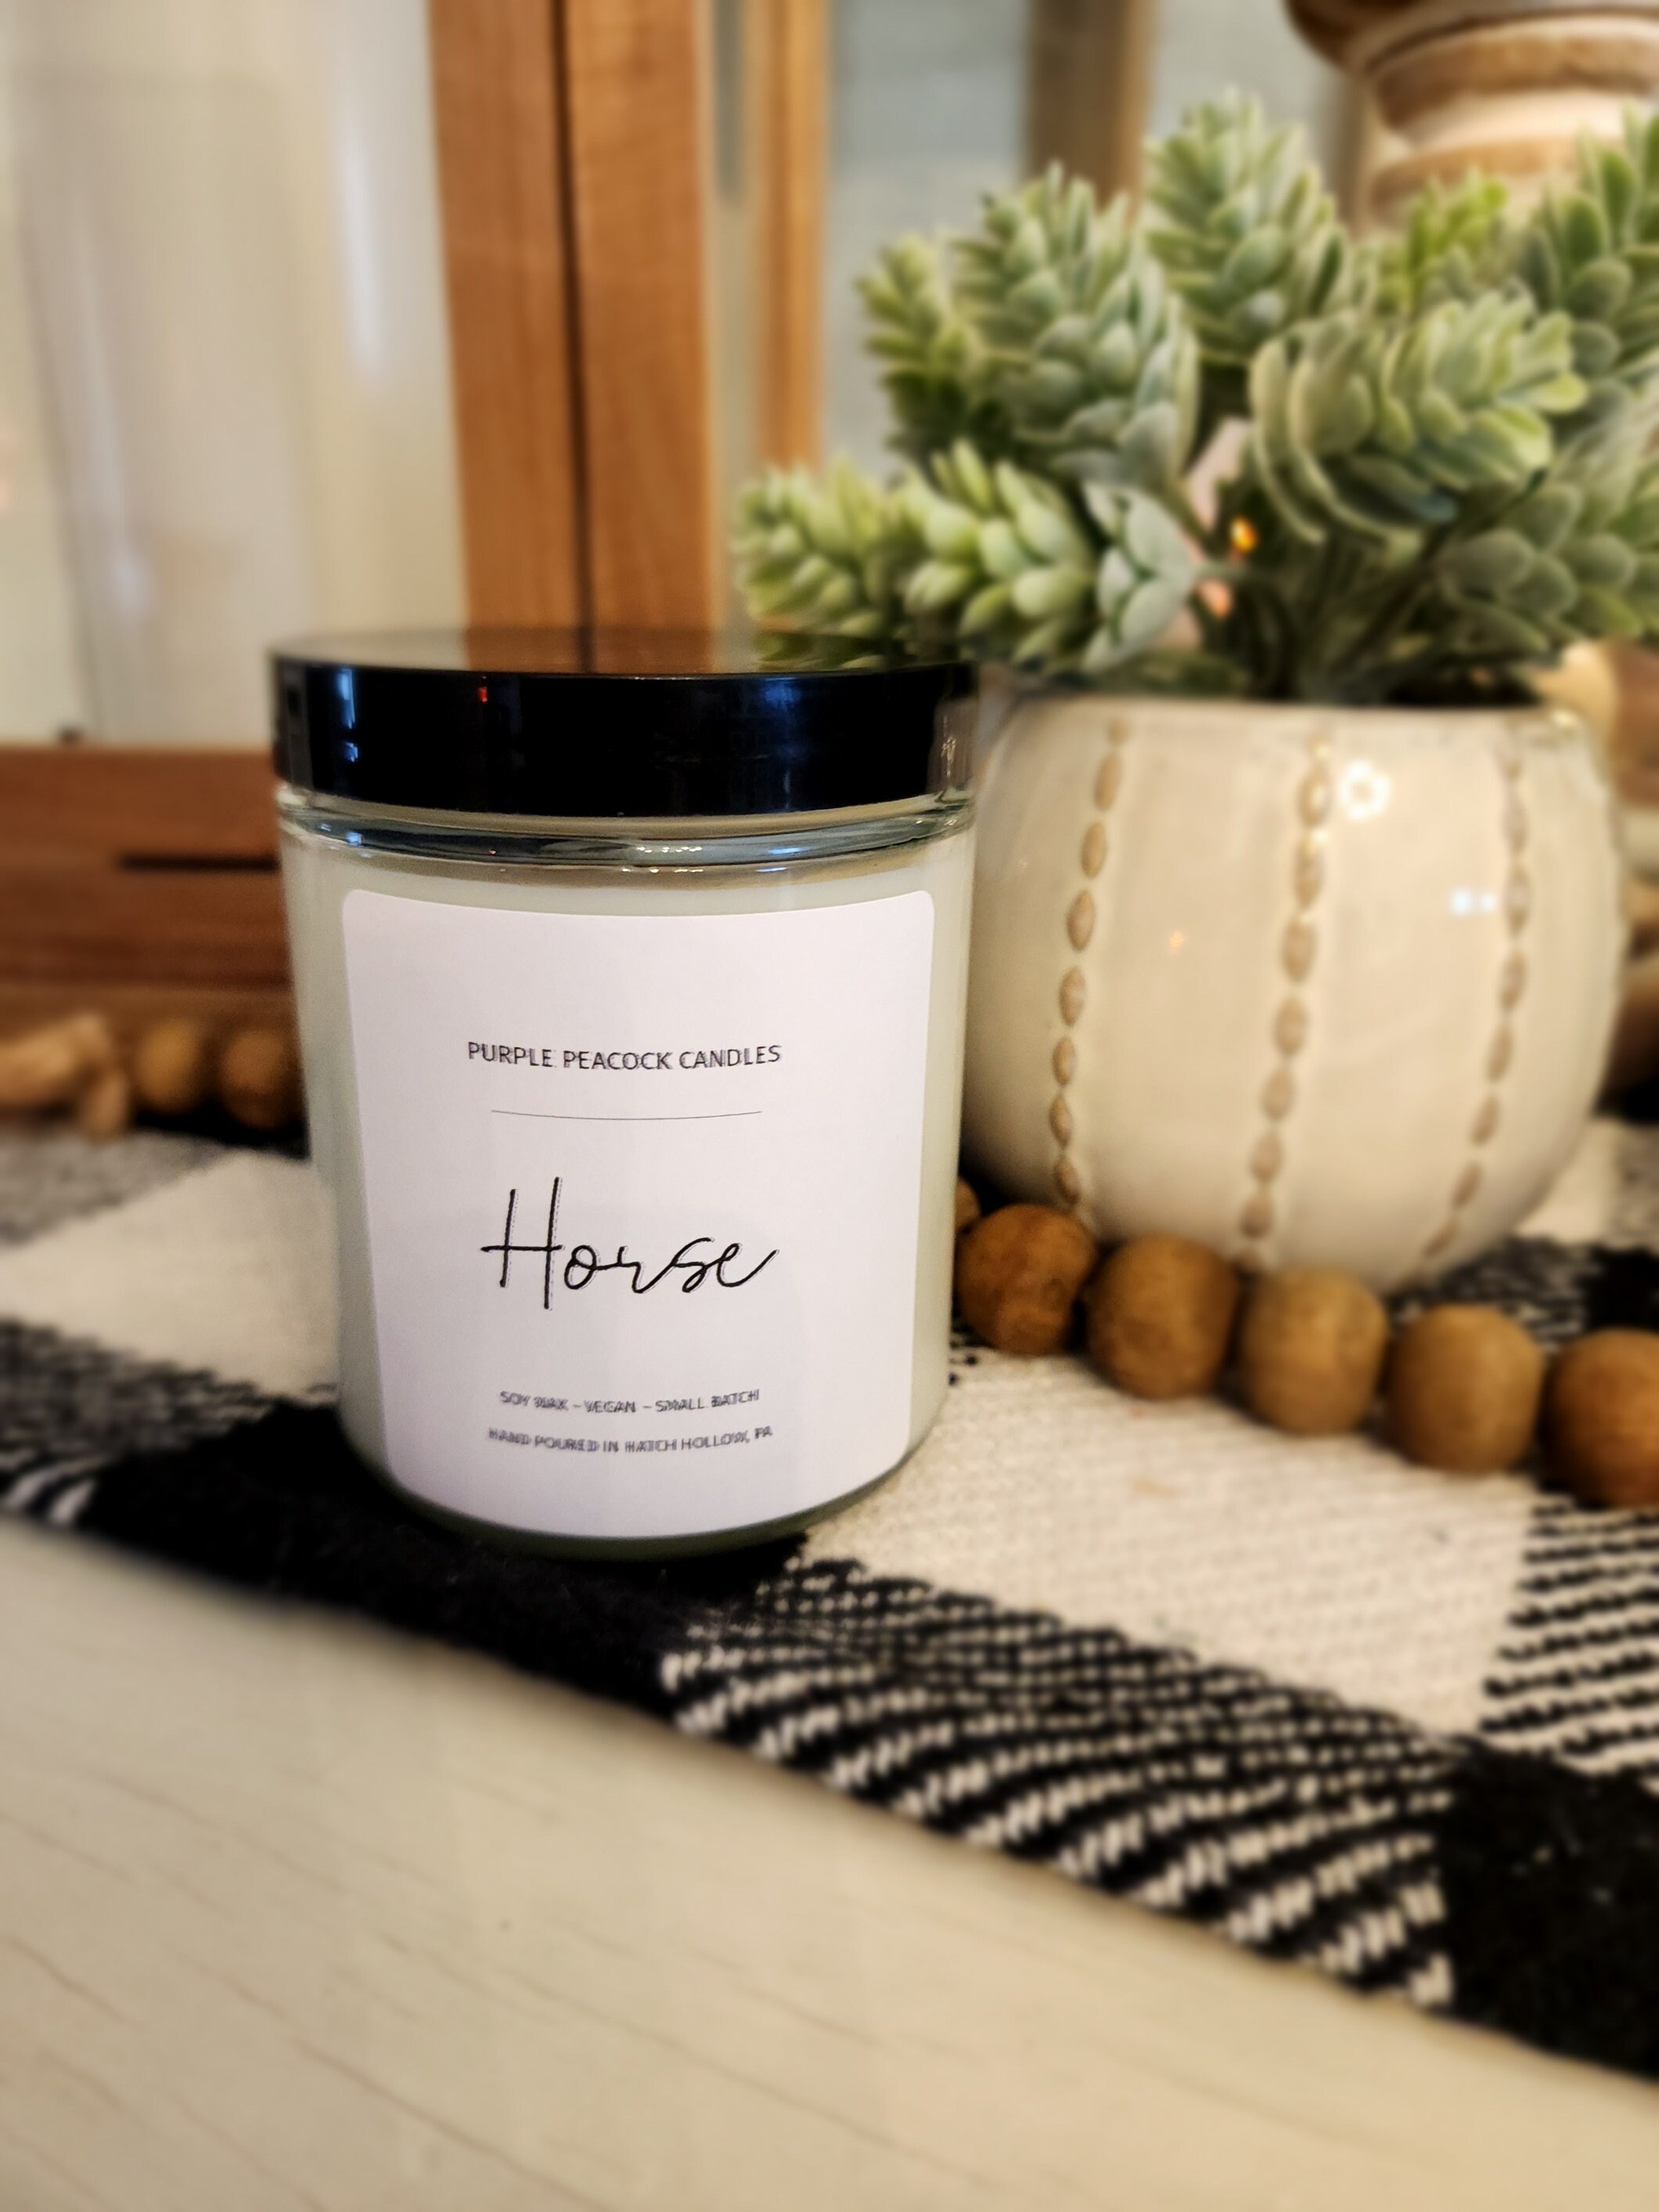 Cowgirl Freshie – Scents of Soy Candle Co.